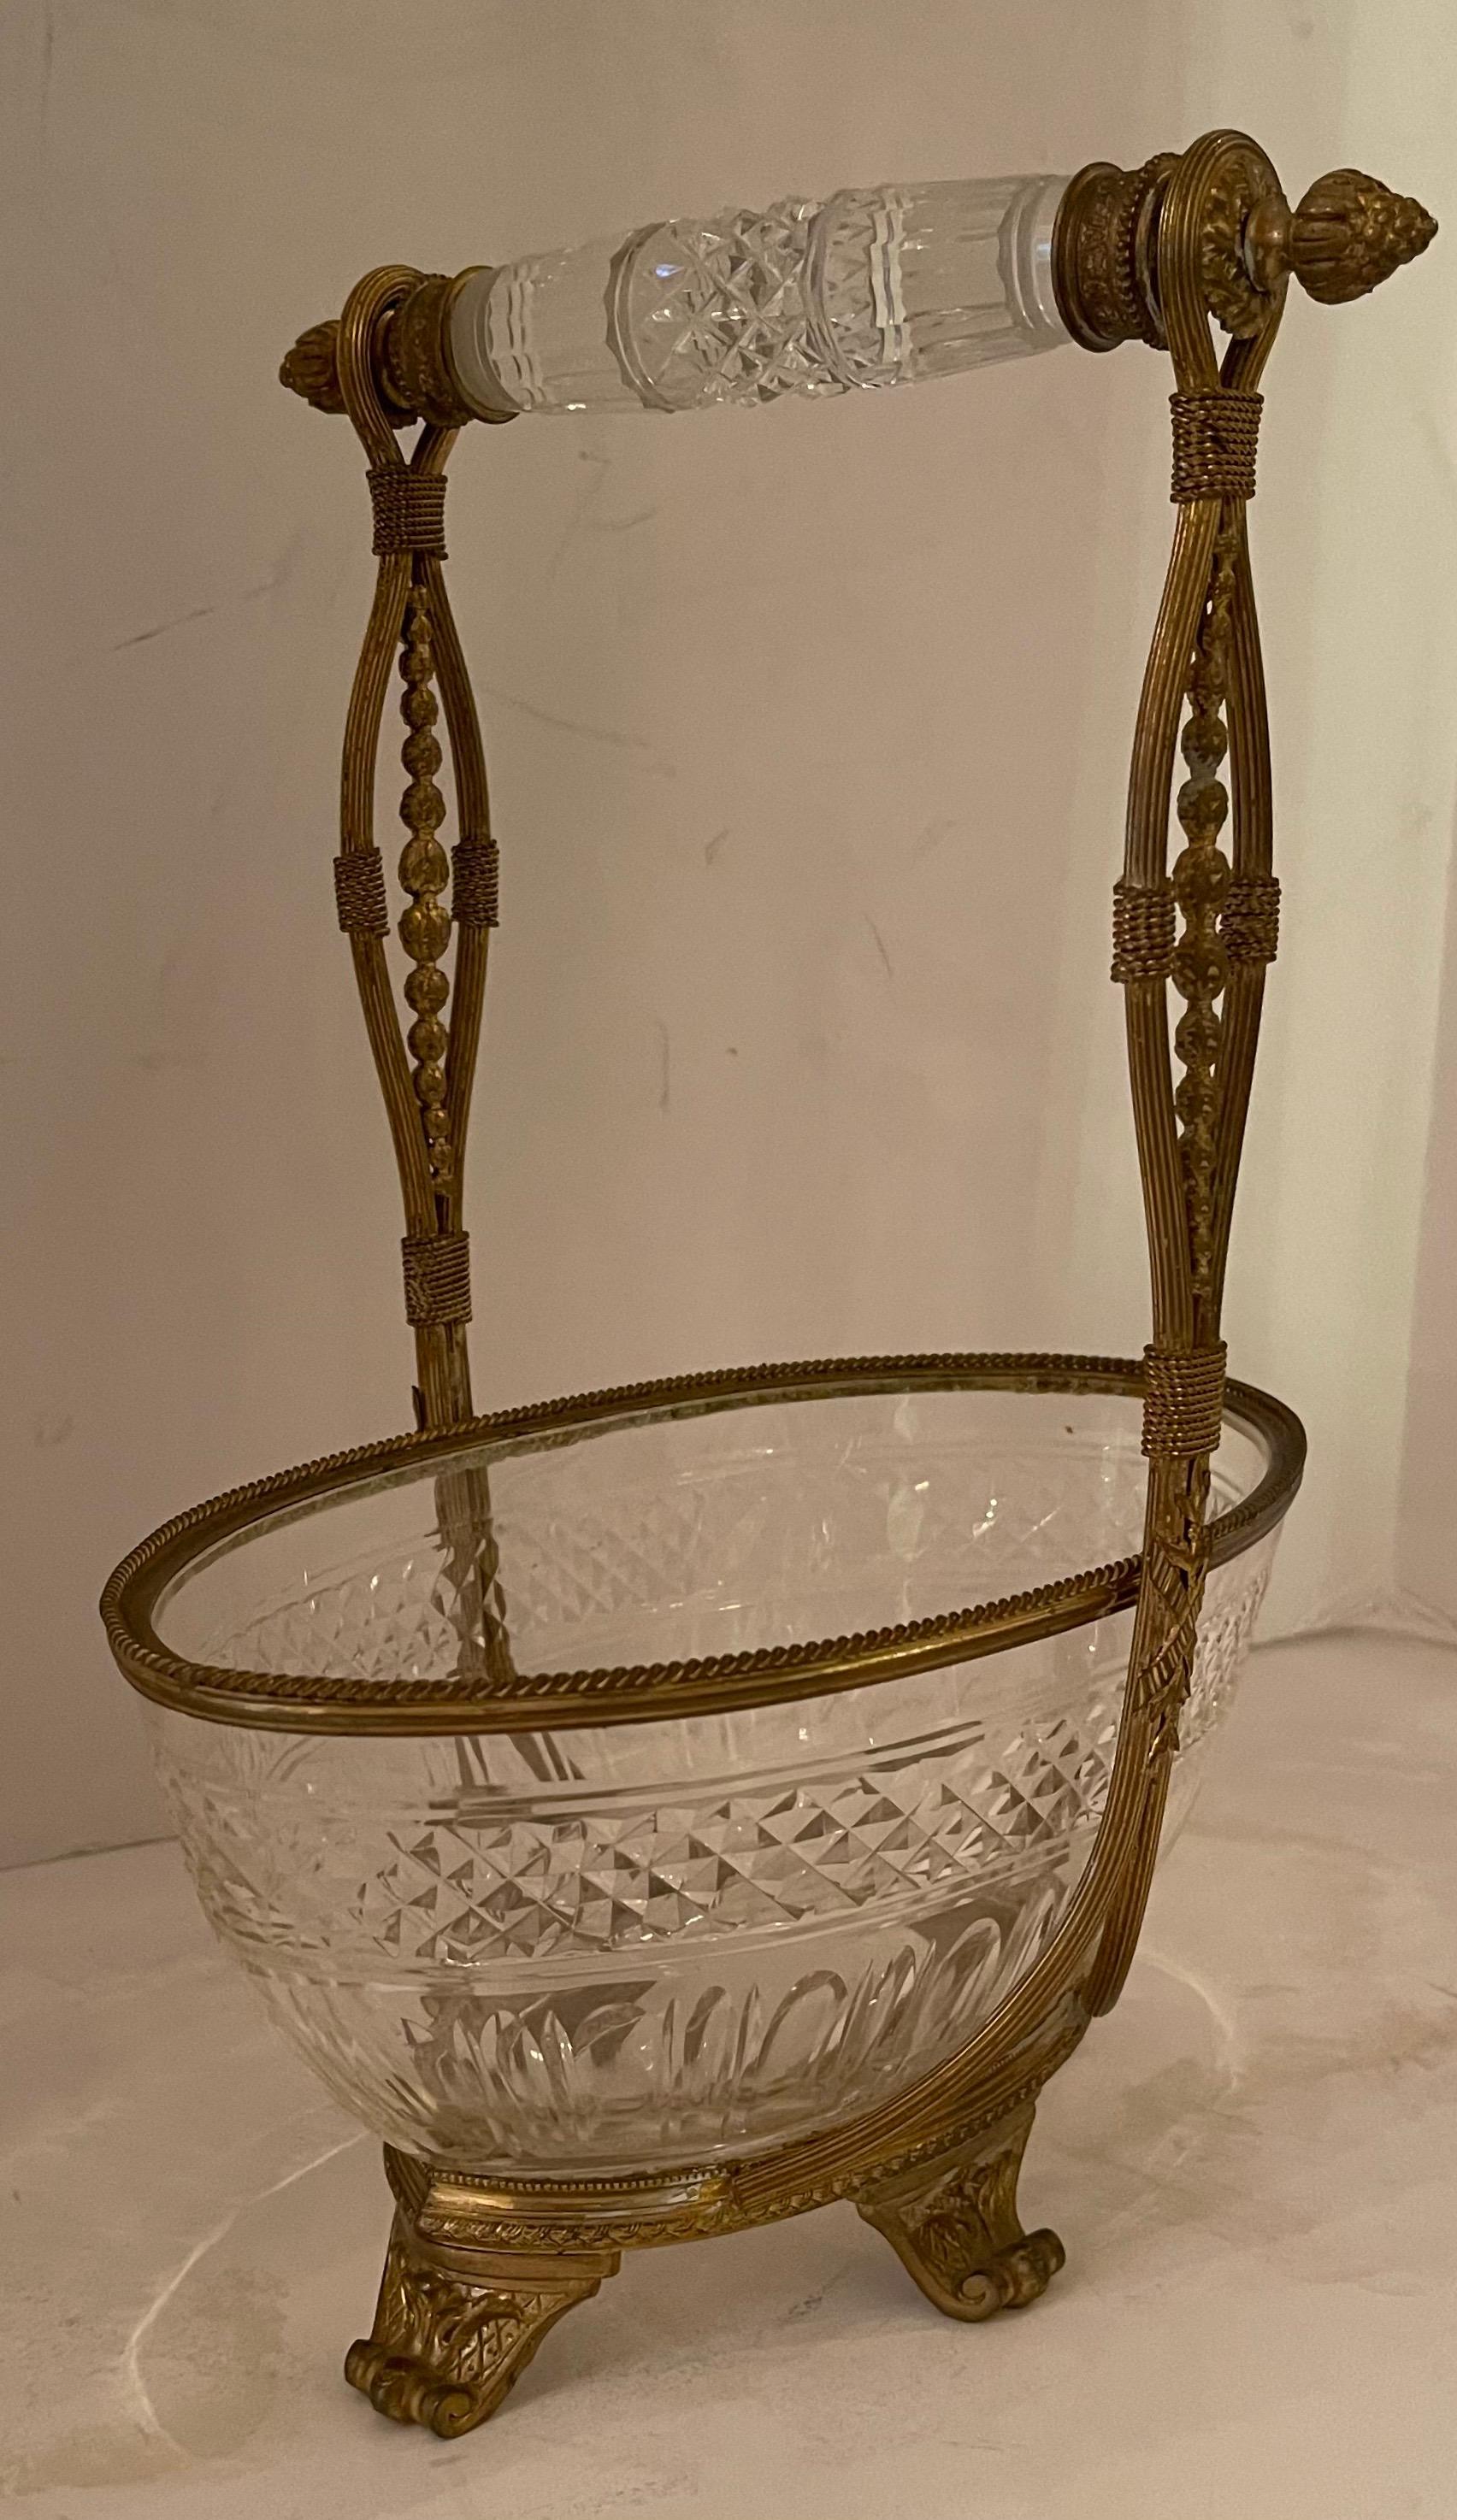 A wonderful french dore bronze & cut crystal oval basket centerpiece with pierced open work handle resting on four legs.
In the manner of Baccarat.